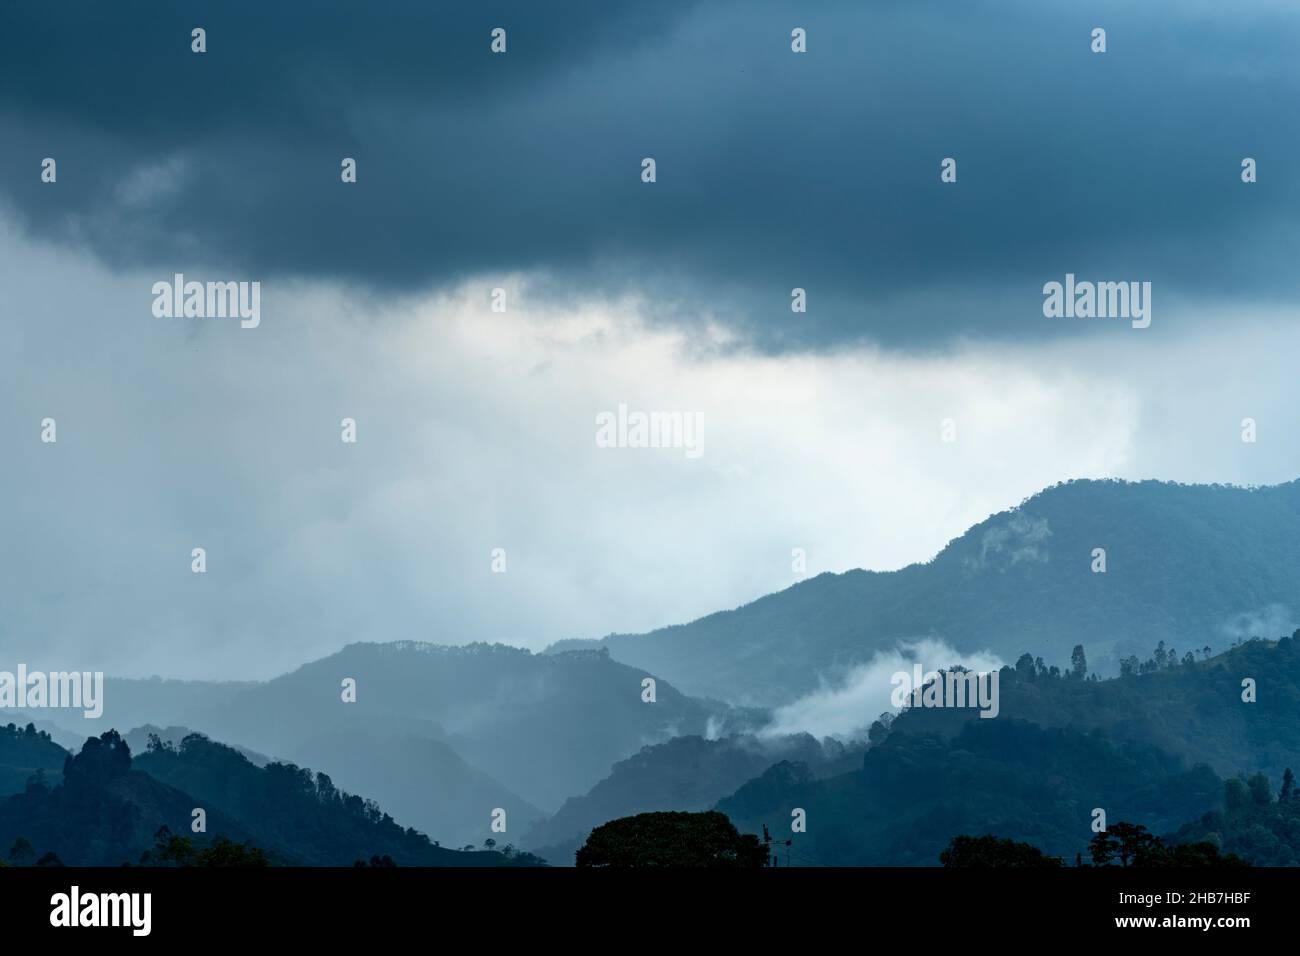 Rainy weather over the Andes mountains in the evening, Armenia region, Colombia, South America Stock Photo